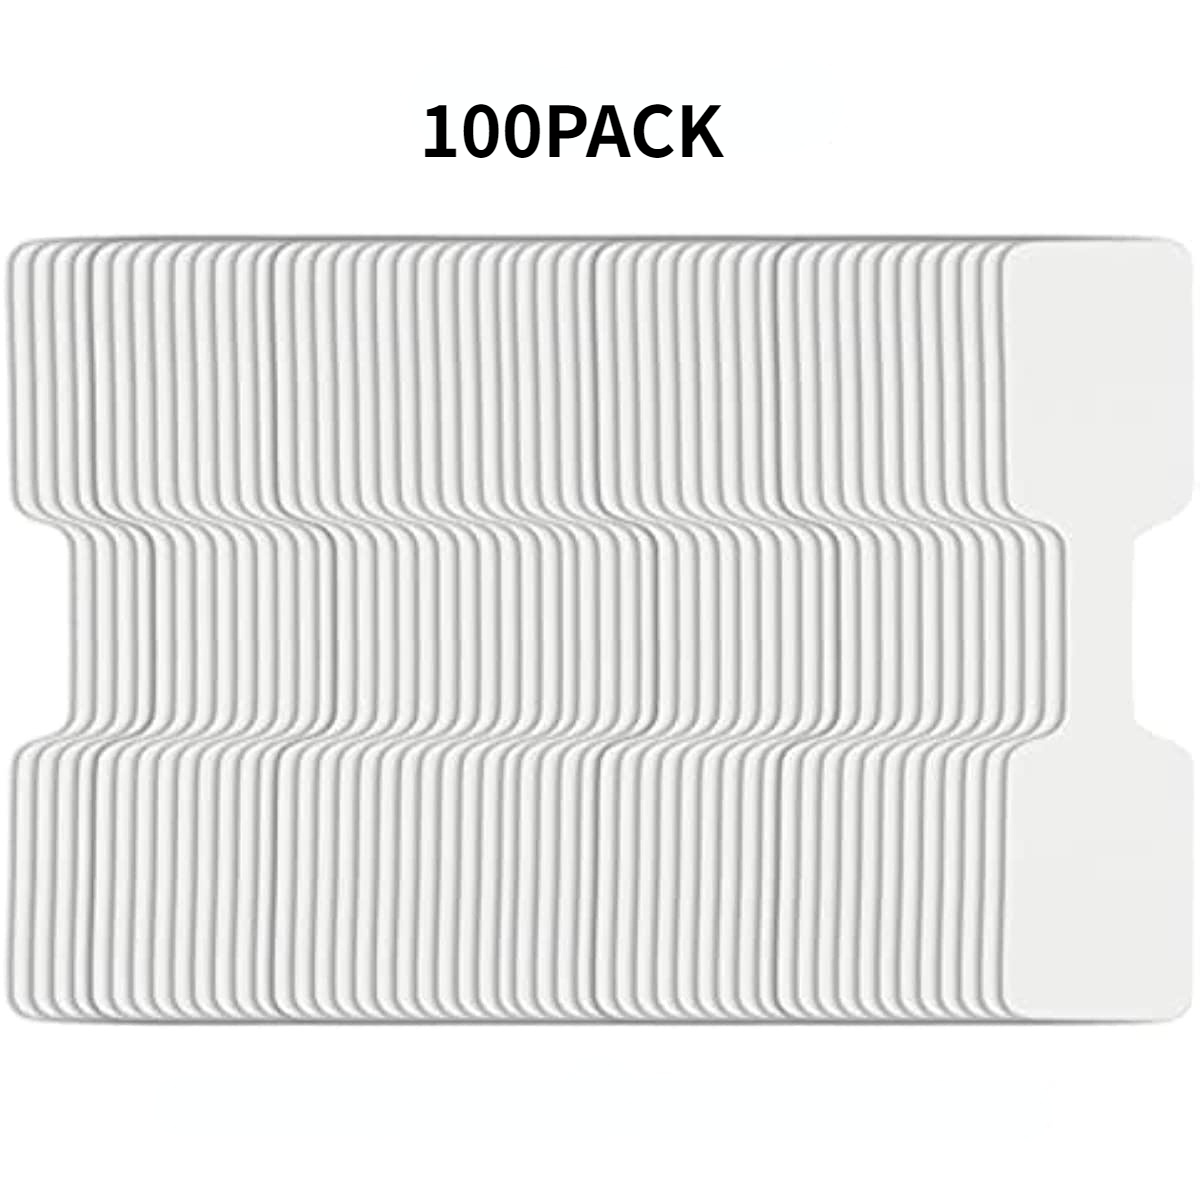 Generic 1000pcs Price Stickers for Small Business Jewelry Price Tags Self Adhesive White Blank Jewelry Price Label Roll for Clothing Ring Necklace